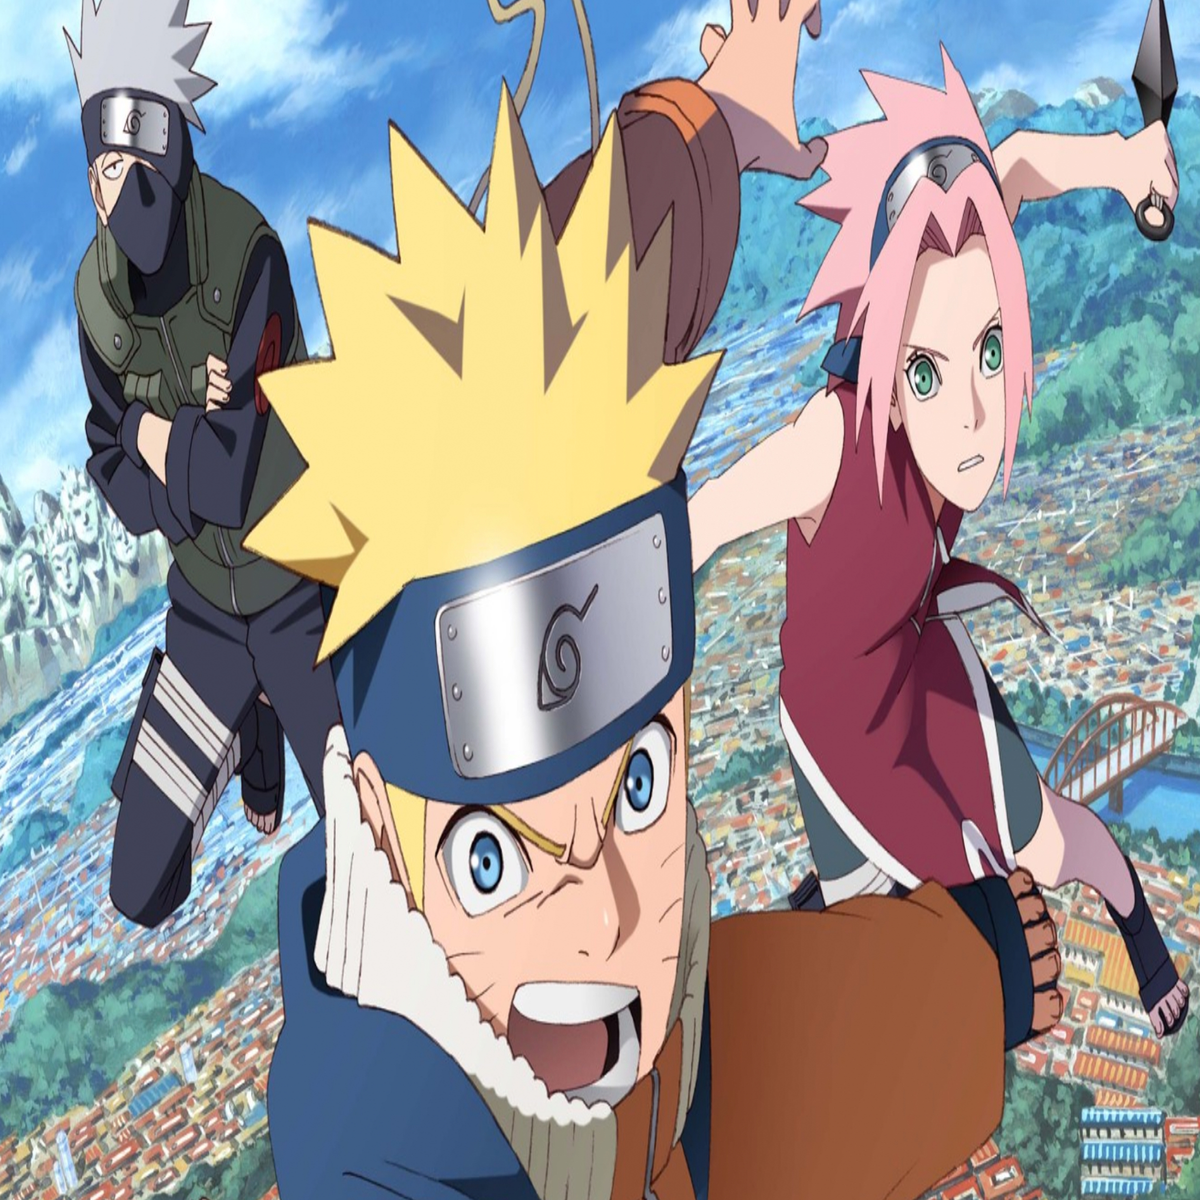 Naruto anime confirmed to return in September with 4 new episodes